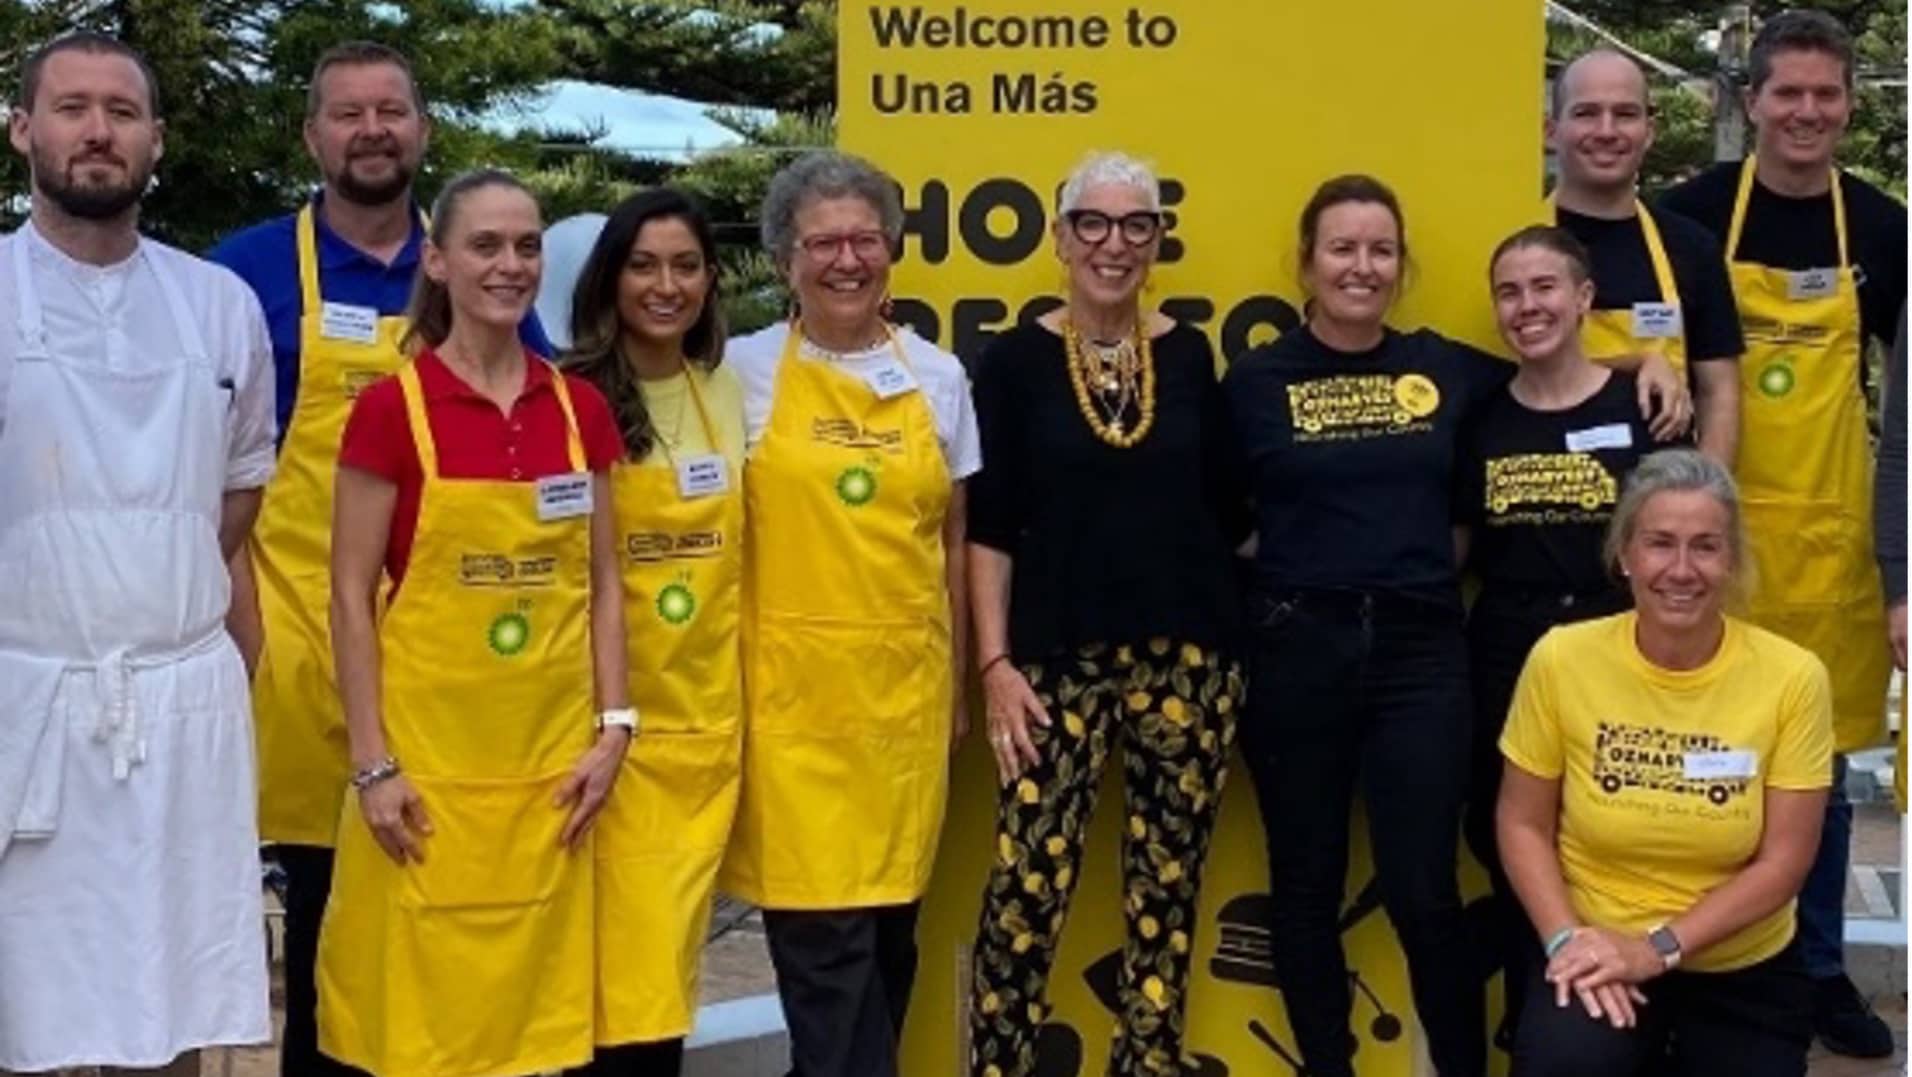 OzHarvest Community Cook Off group photo